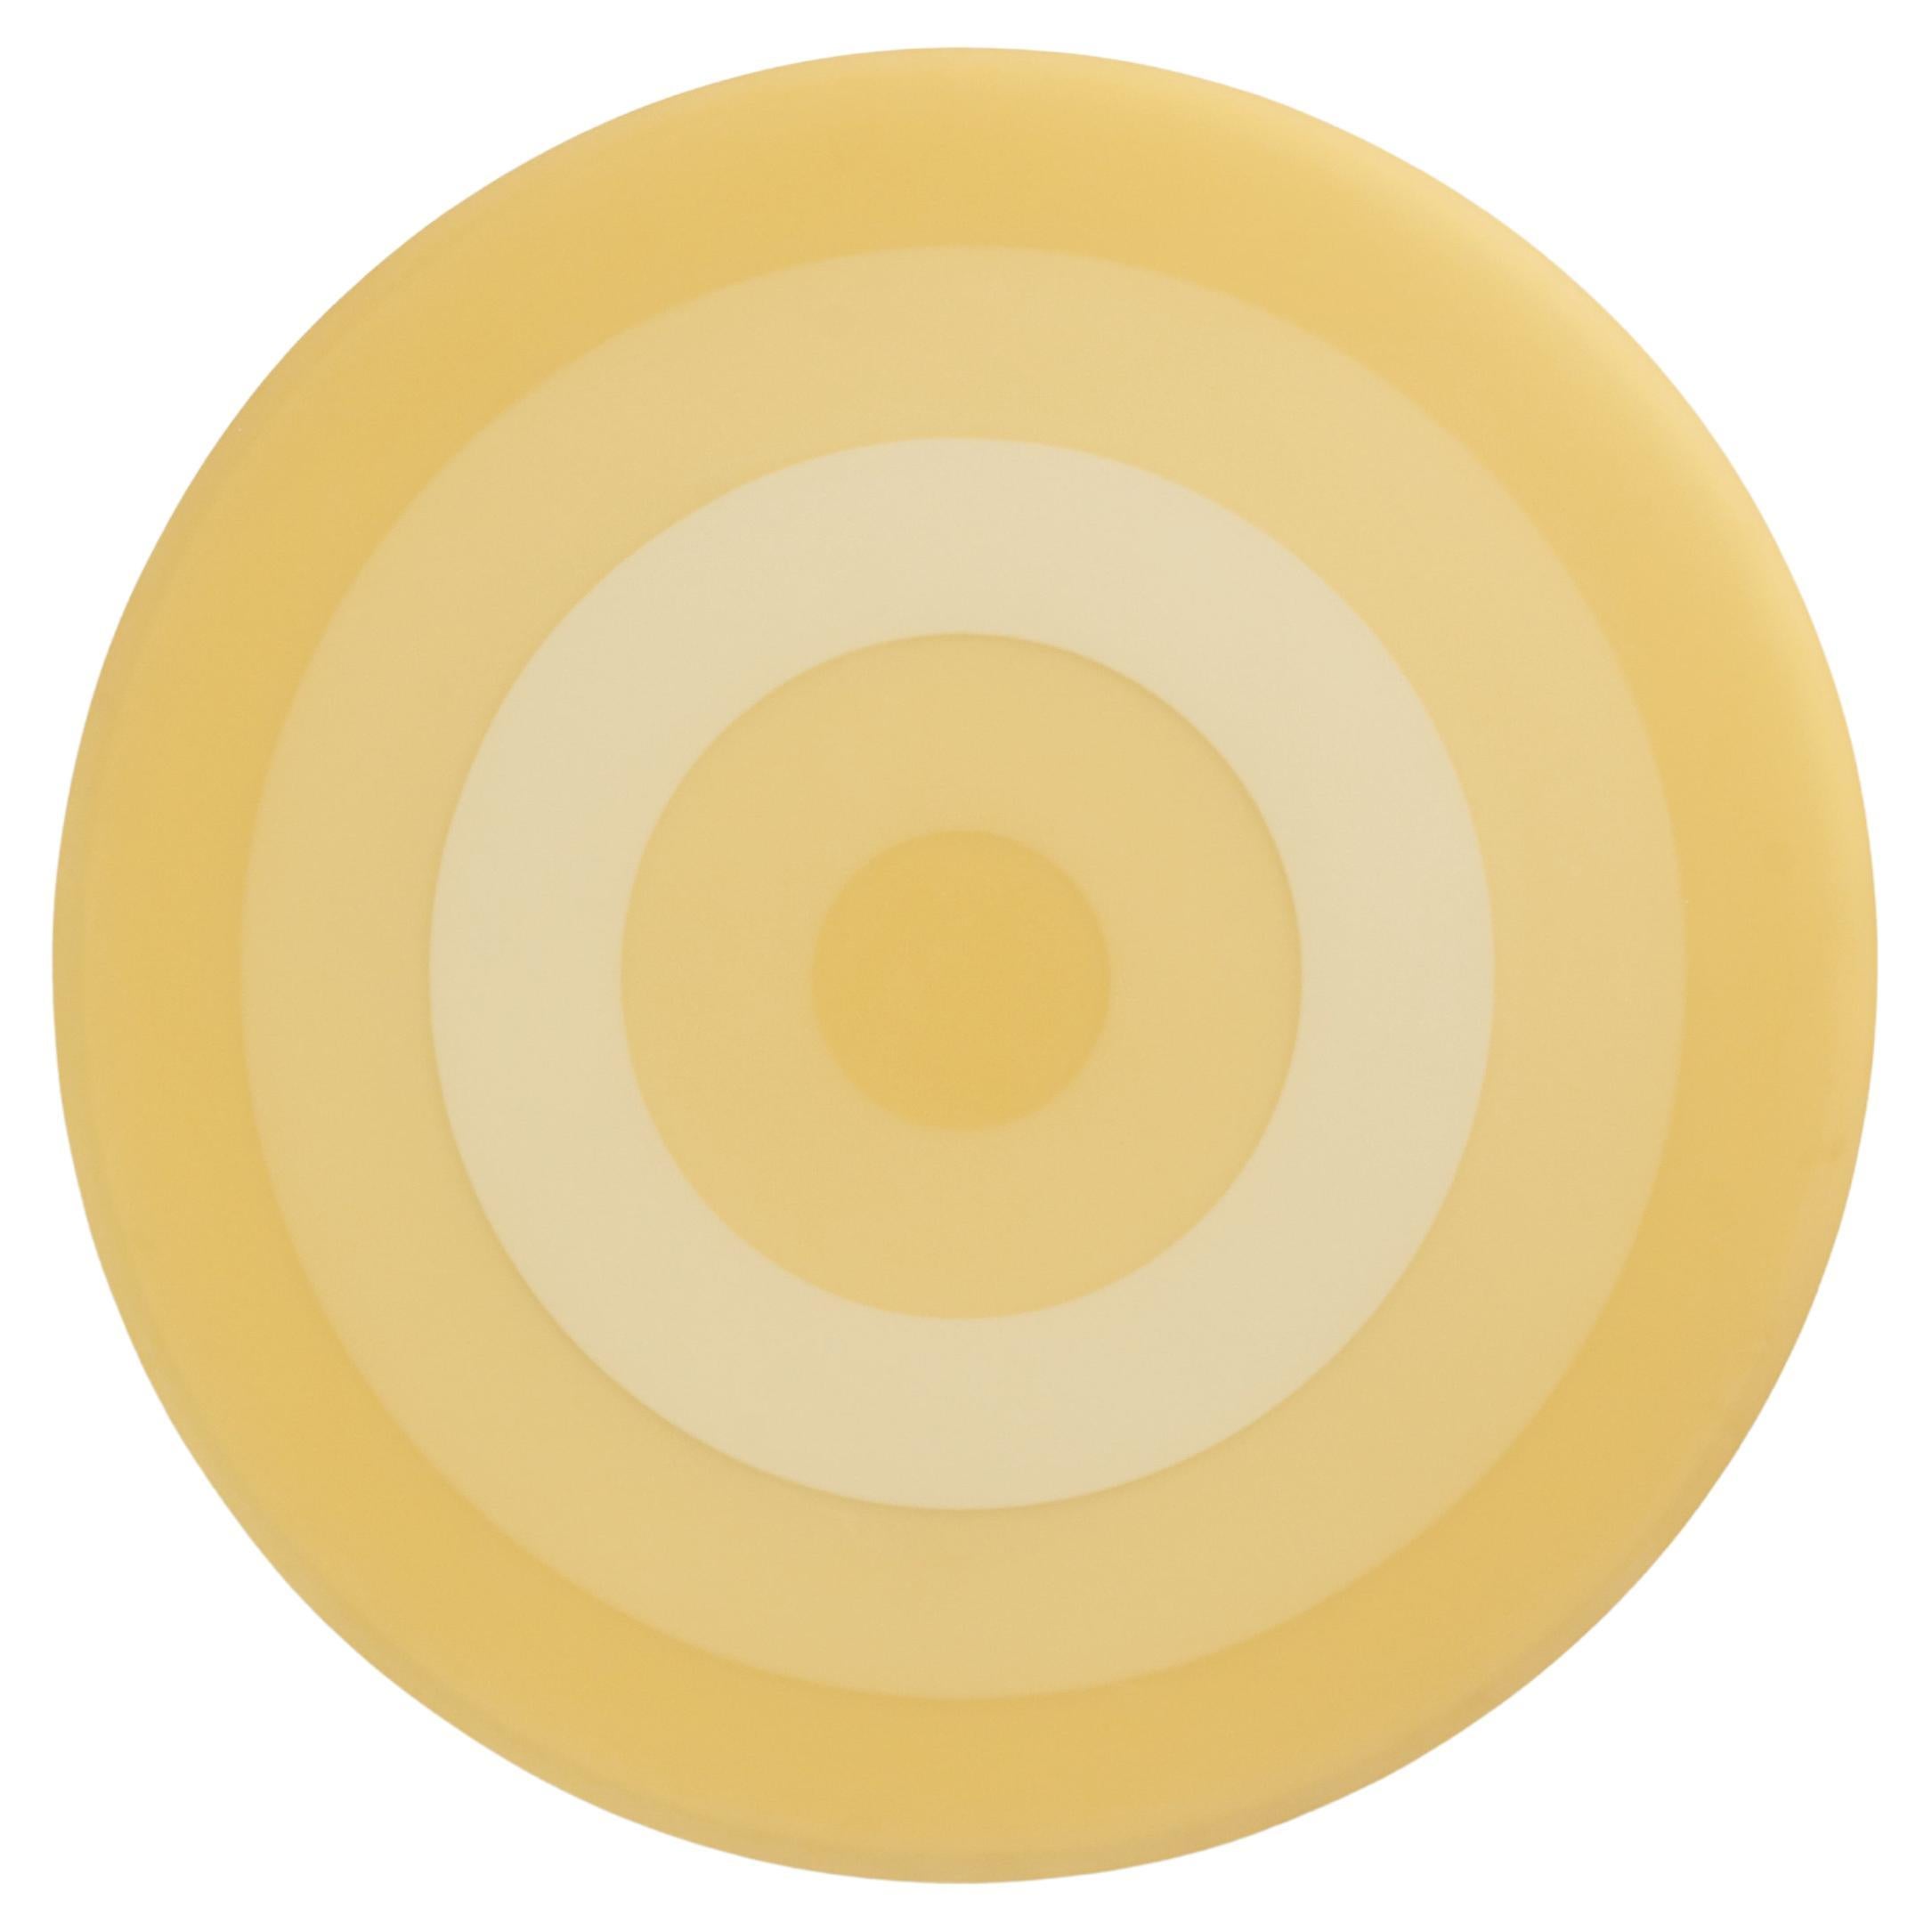 Scale Rings Resin Wall Decor Yellow by Facture, Represented by Tuleste Factory